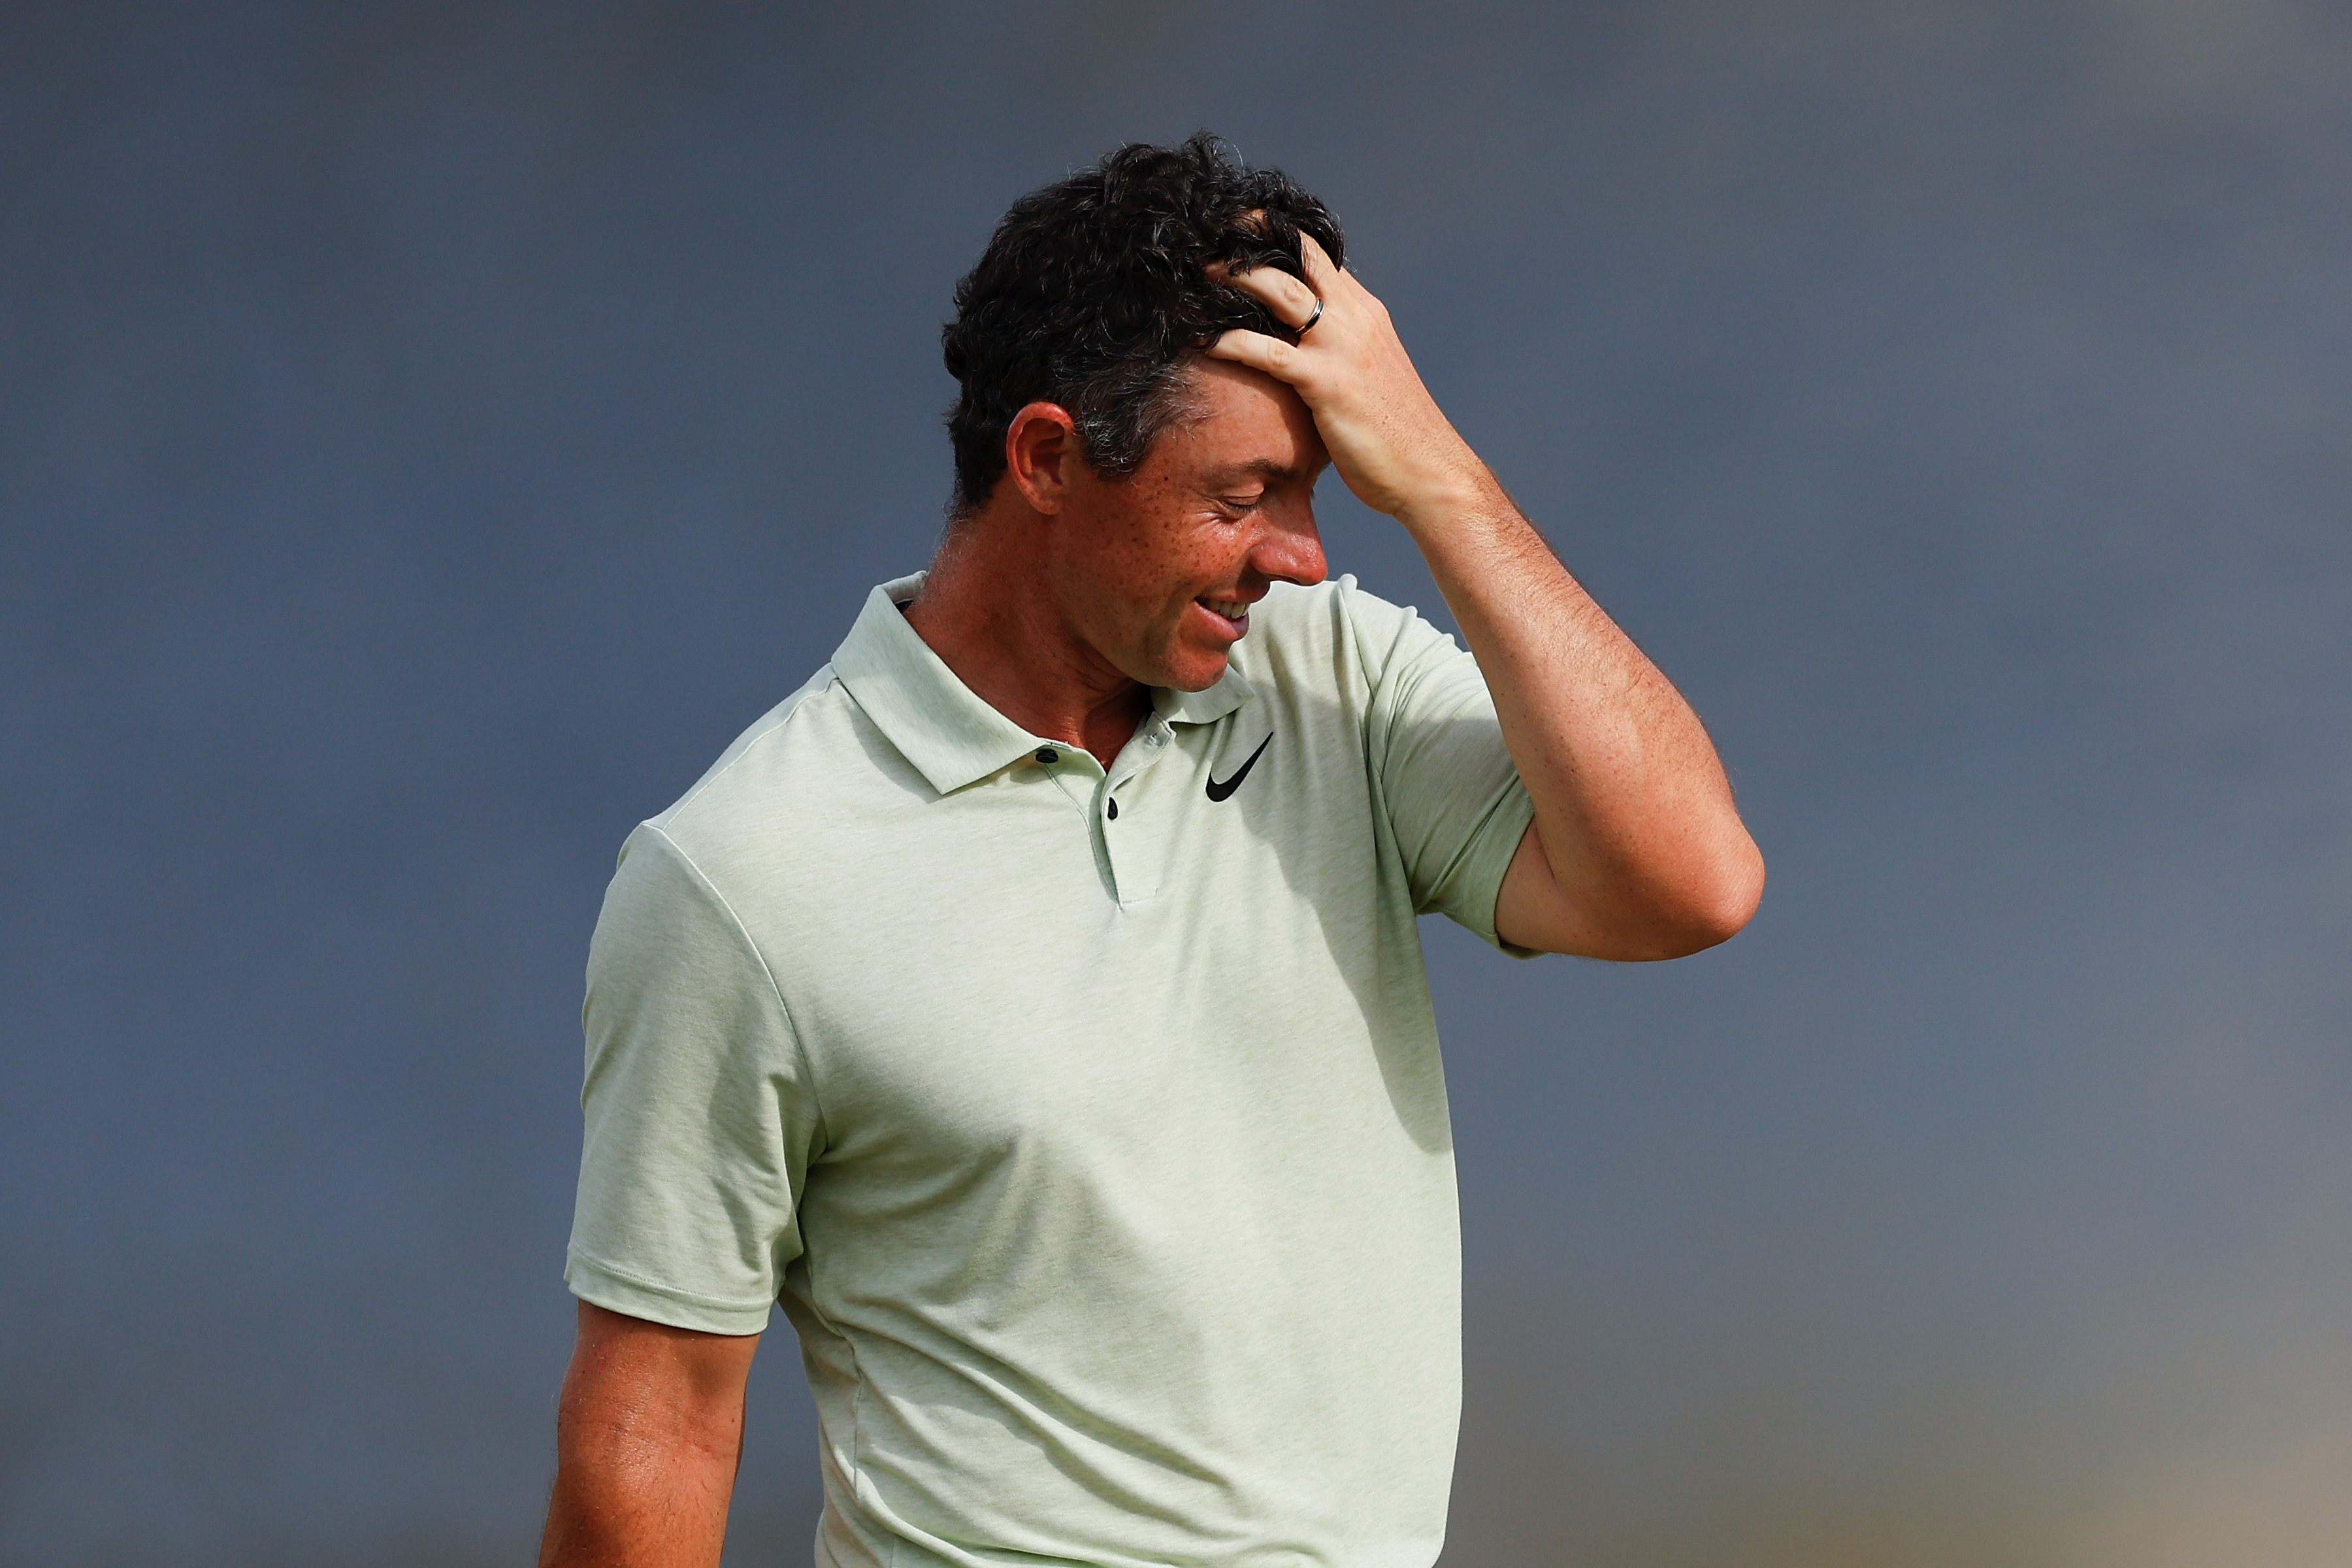 Rory McIlroy of Northern Ireland reacts as he walks off the 18th hole after finishing the final round of the Arnold Palmer Invitational with a 4-over par 76 March 10 in Orlando. (Photo by Mike Ehrmann/Getty Images)